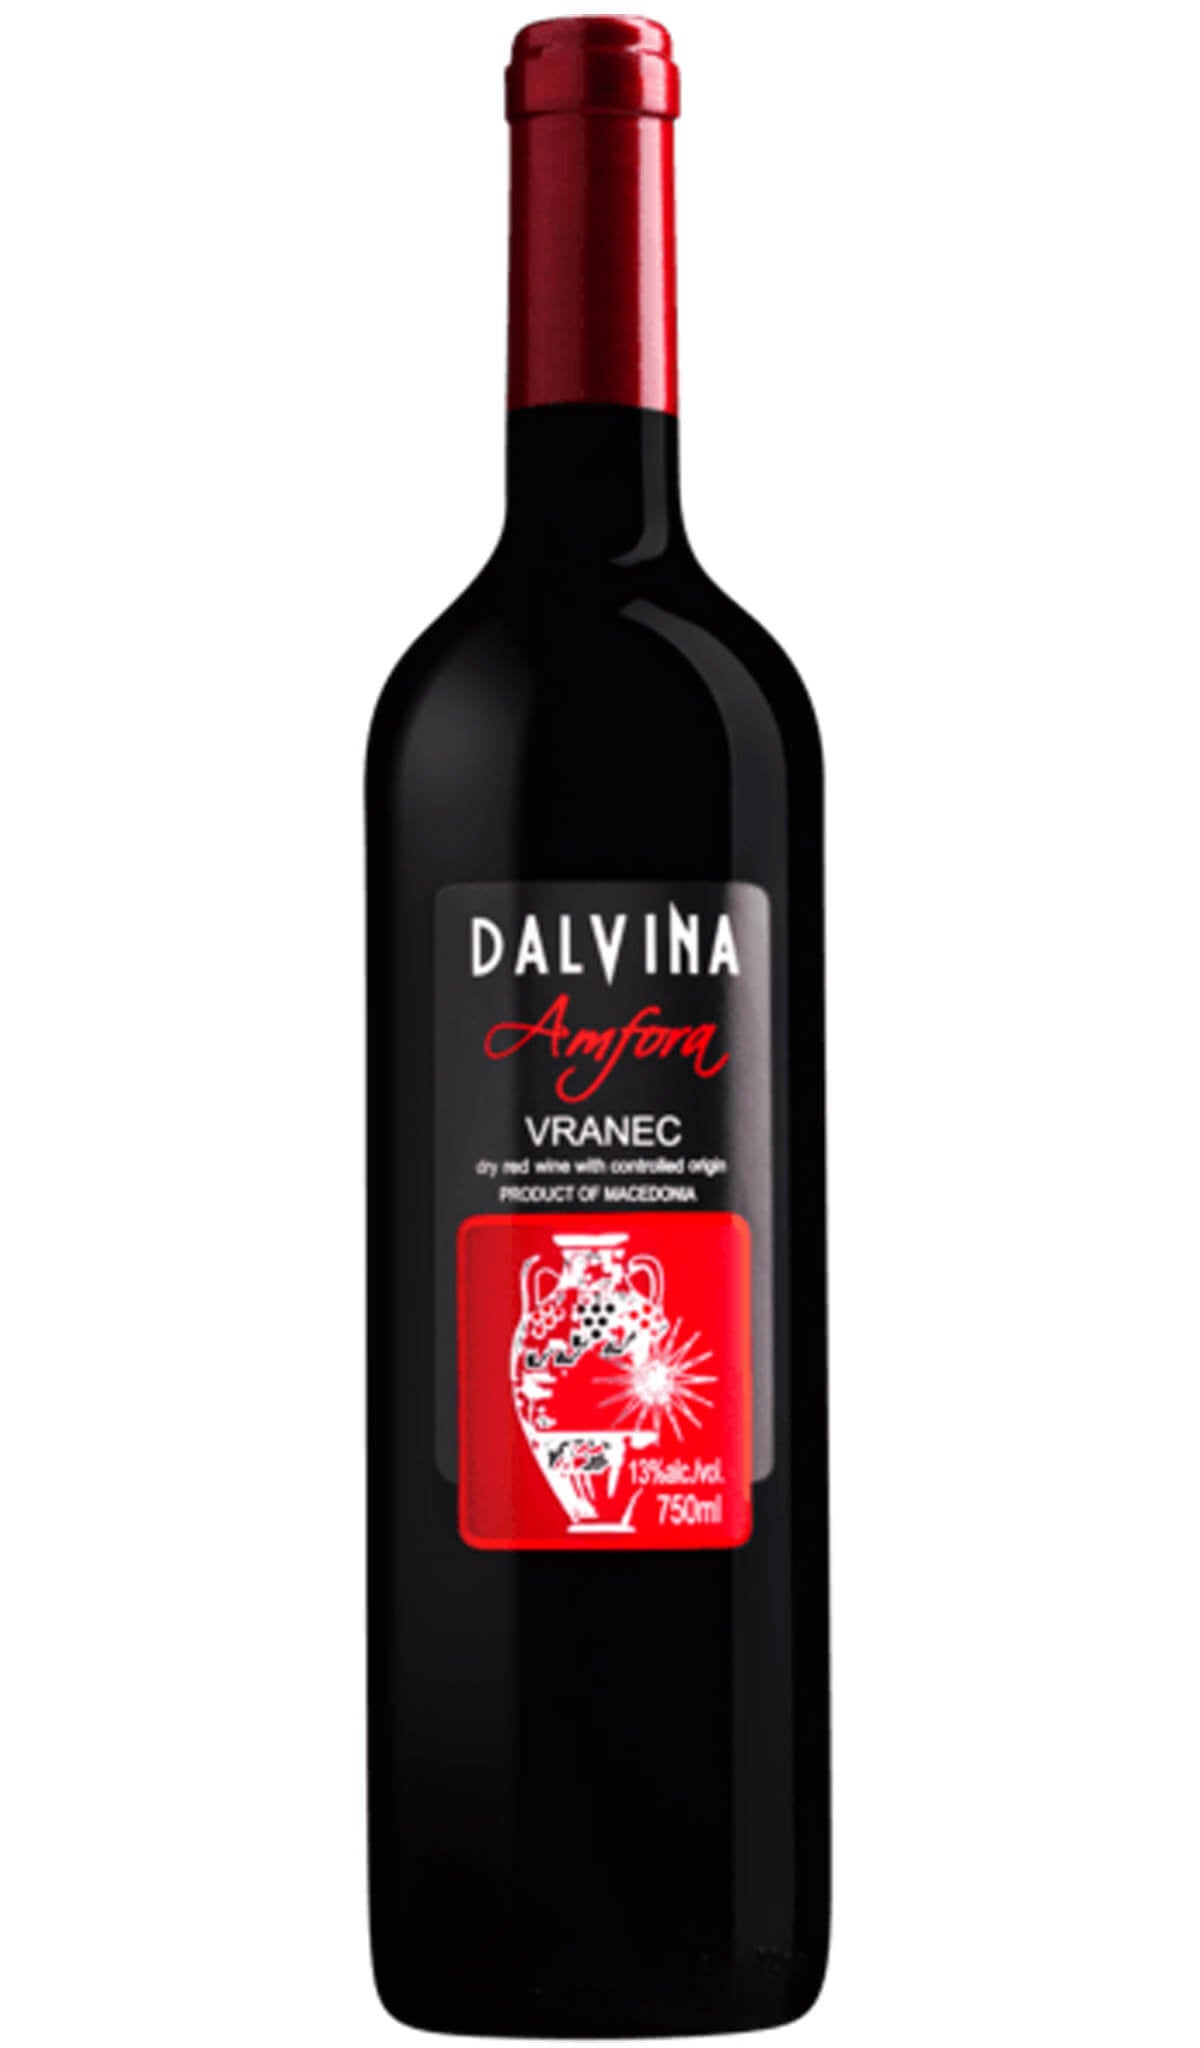 Find out more, explore the range and purchase Dalvina Amfora Vranec 2016 (Macedonia) available online at Wine Sellers Direct - Australia's independent liquor specialists.